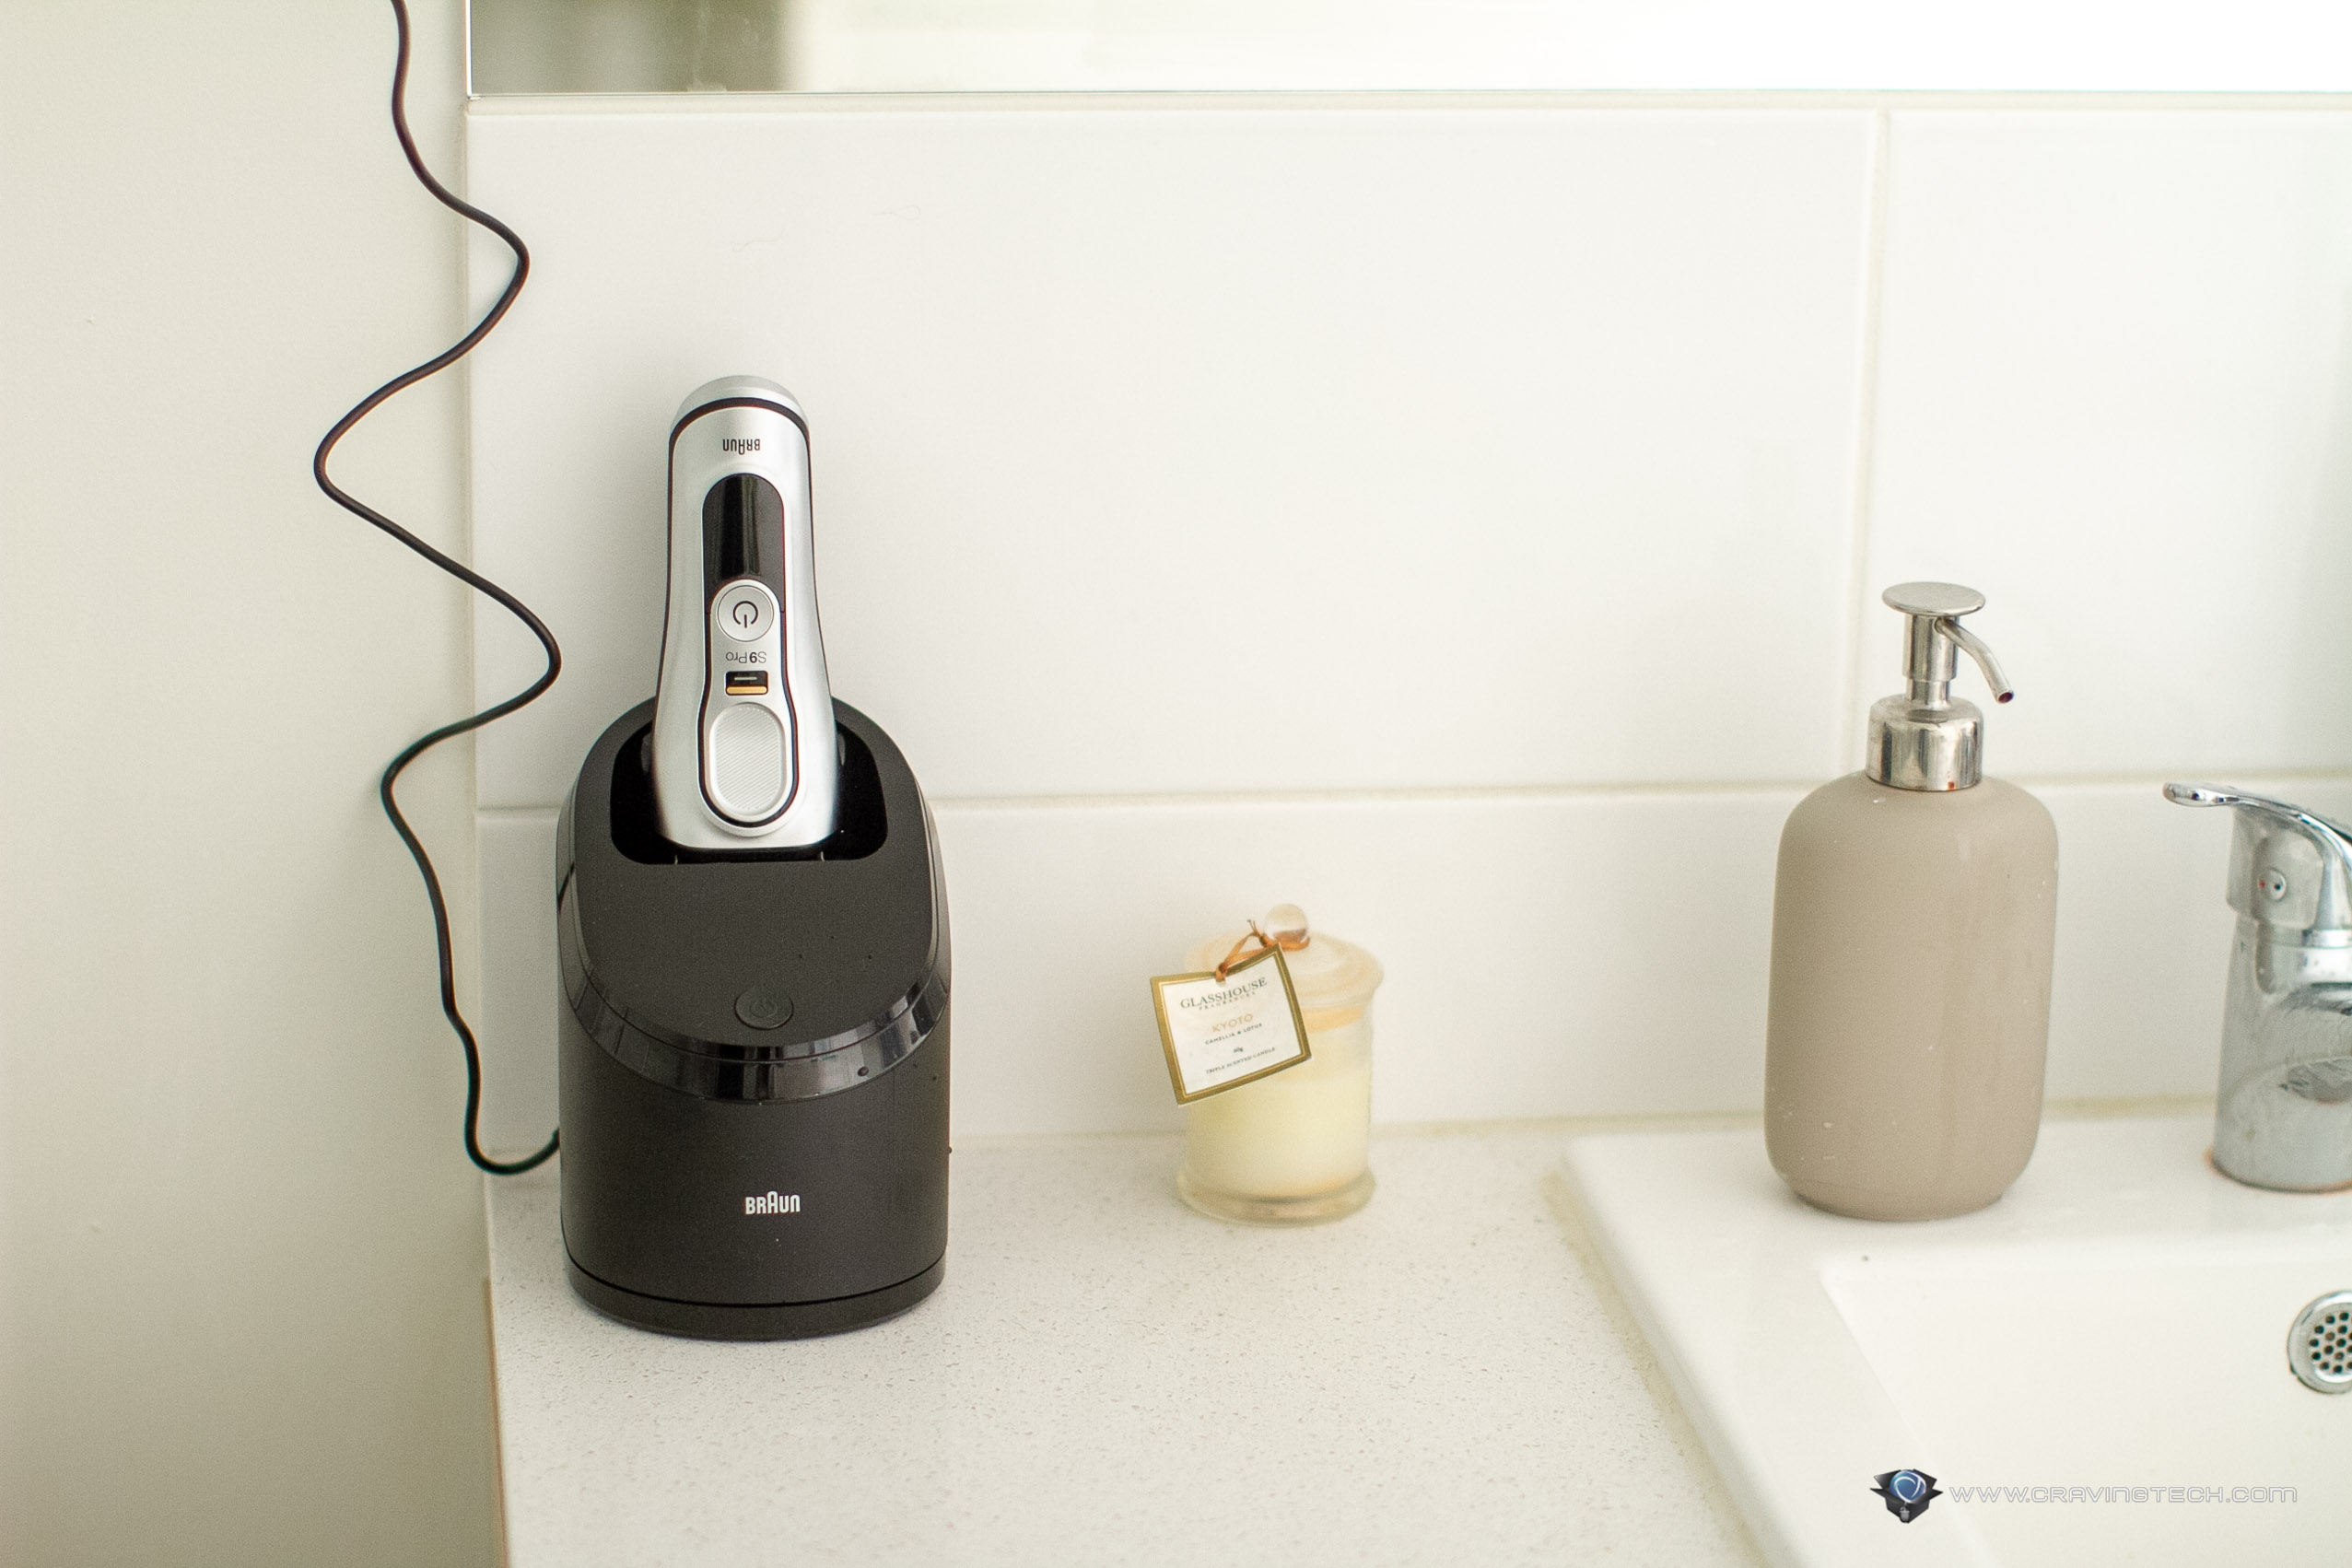 Braun Series 9 Pro Shaver with Cleaning & Charging Statio